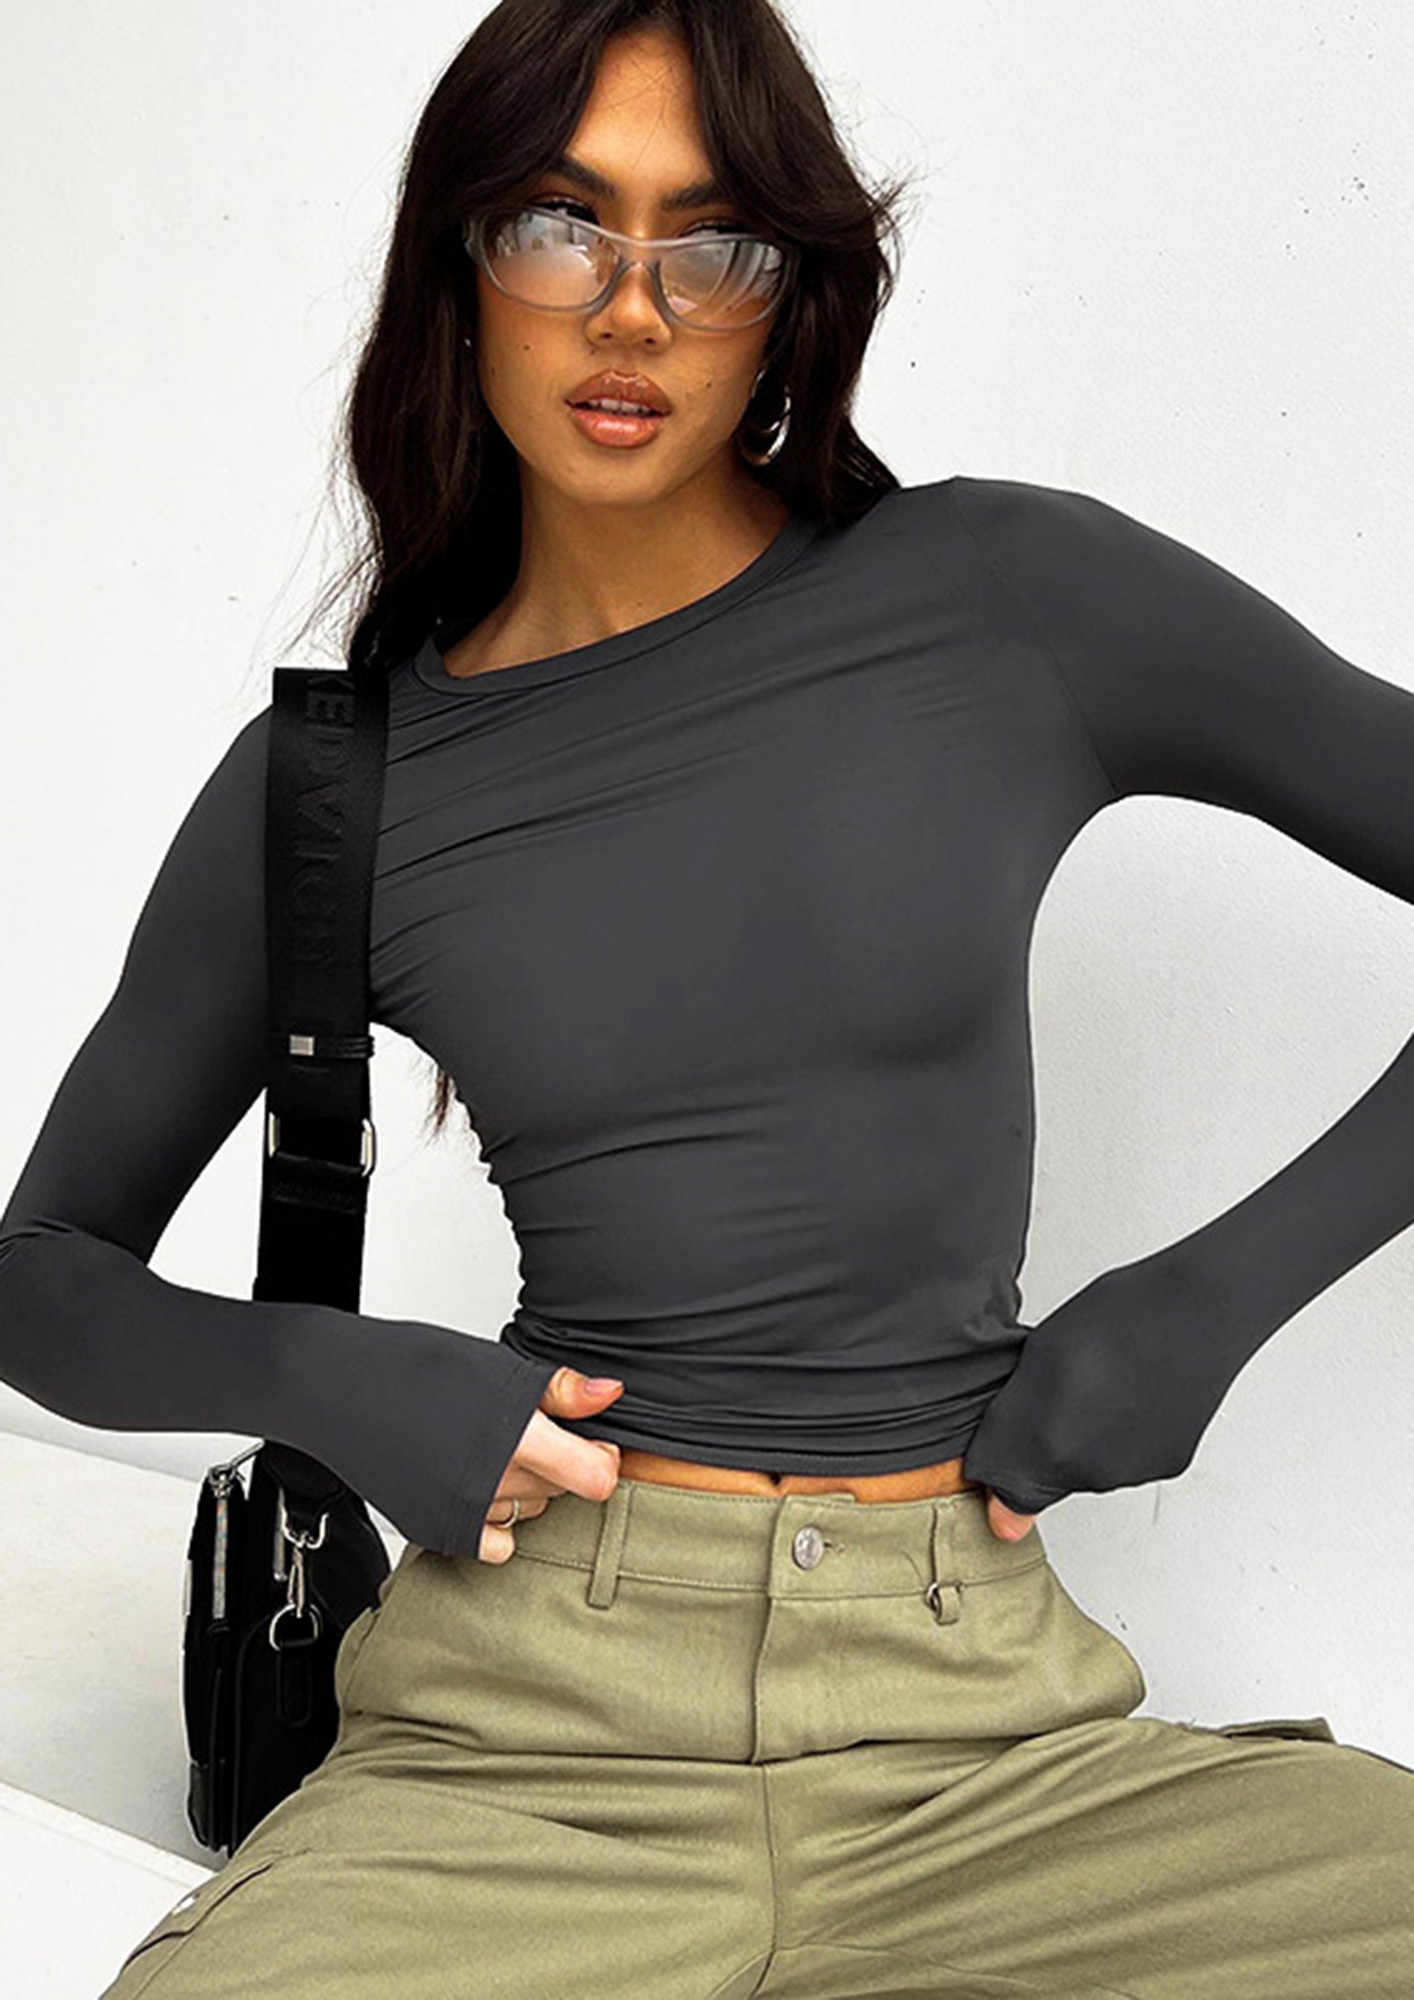 Buy CREW NECK FITTED GREY SKINZZ T-SHIRT for Women Online in India